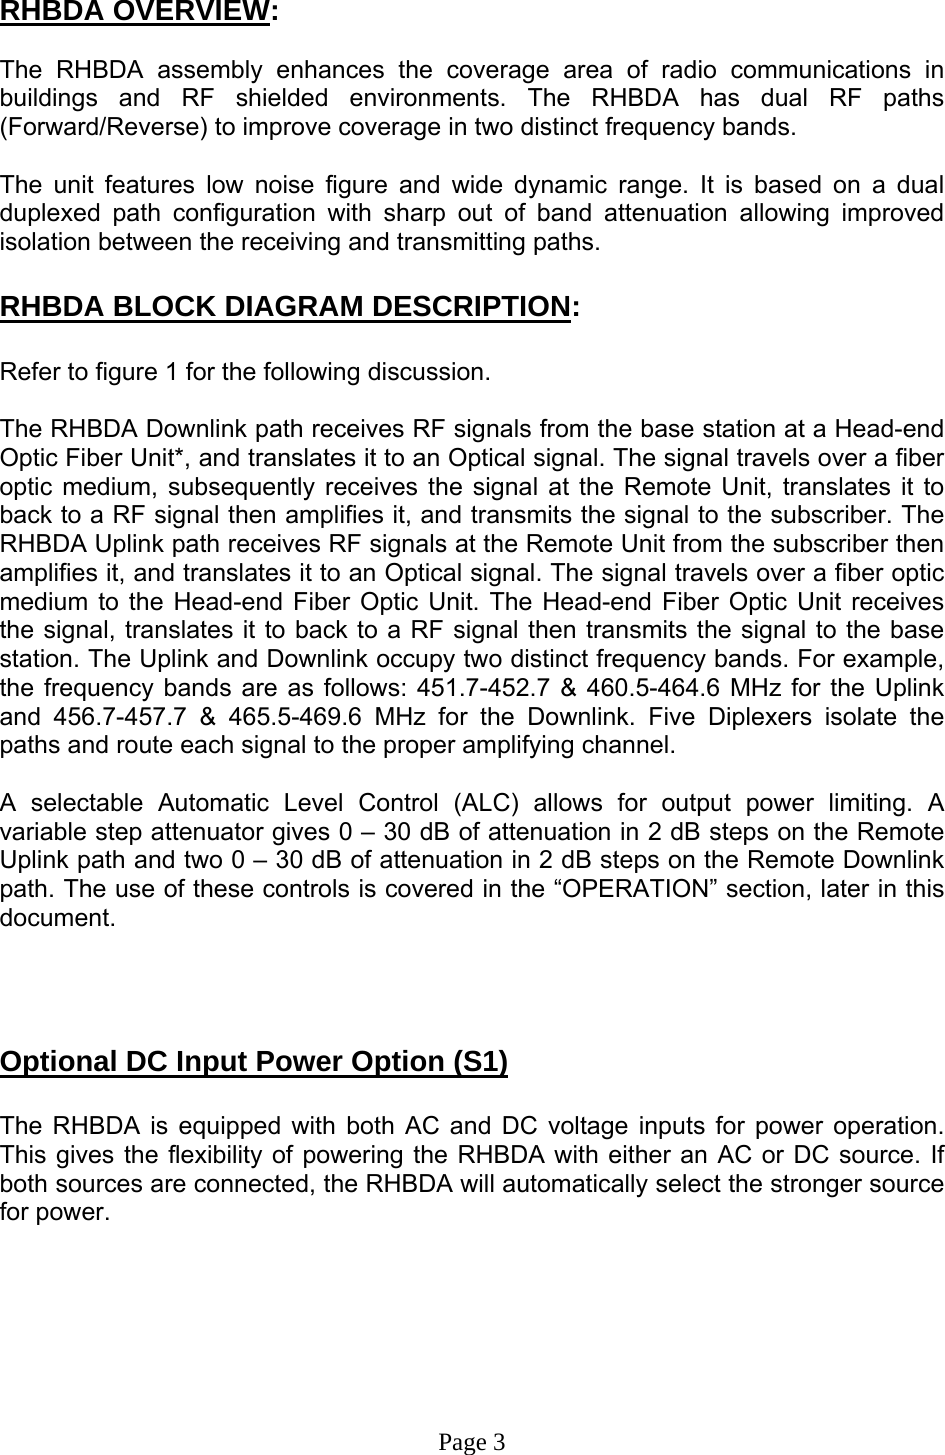  RHBDA OVERVIEW:  The RHBDA assembly enhances the coverage area of radio communications in buildings and RF shielded environments. The RHBDA has dual RF paths (Forward/Reverse) to improve coverage in two distinct frequency bands.     The unit features low noise figure and wide dynamic range. It is based on a dual duplexed path configuration with sharp out of band attenuation allowing improved isolation between the receiving and transmitting paths.     RHBDA BLOCK DIAGRAM DESCRIPTION:  Refer to figure 1 for the following discussion.  The RHBDA Downlink path receives RF signals from the base station at a Head-end Optic Fiber Unit*, and translates it to an Optical signal. The signal travels over a fiber optic medium, subsequently receives the signal at the Remote Unit, translates it to back to a RF signal then amplifies it, and transmits the signal to the subscriber. The RHBDA Uplink path receives RF signals at the Remote Unit from the subscriber then amplifies it, and translates it to an Optical signal. The signal travels over a fiber optic medium to the Head-end Fiber Optic Unit. The Head-end Fiber Optic Unit receives the signal, translates it to back to a RF signal then transmits the signal to the base station. The Uplink and Downlink occupy two distinct frequency bands. For example, the frequency bands are as follows: 451.7-452.7 &amp; 460.5-464.6 MHz for the Uplink and 456.7-457.7 &amp; 465.5-469.6 MHz for the Downlink. Five Diplexers isolate the paths and route each signal to the proper amplifying channel.  A selectable Automatic Level Control (ALC) allows for output power limiting. A variable step attenuator gives 0 – 30 dB of attenuation in 2 dB steps on the Remote Uplink path and two 0 – 30 dB of attenuation in 2 dB steps on the Remote Downlink path. The use of these controls is covered in the “OPERATION” section, later in this document.      Optional DC Input Power Option (S1)  The RHBDA is equipped with both AC and DC voltage inputs for power operation. This gives the flexibility of powering the RHBDA with either an AC or DC source. If both sources are connected, the RHBDA will automatically select the stronger source for power.       Page 3 